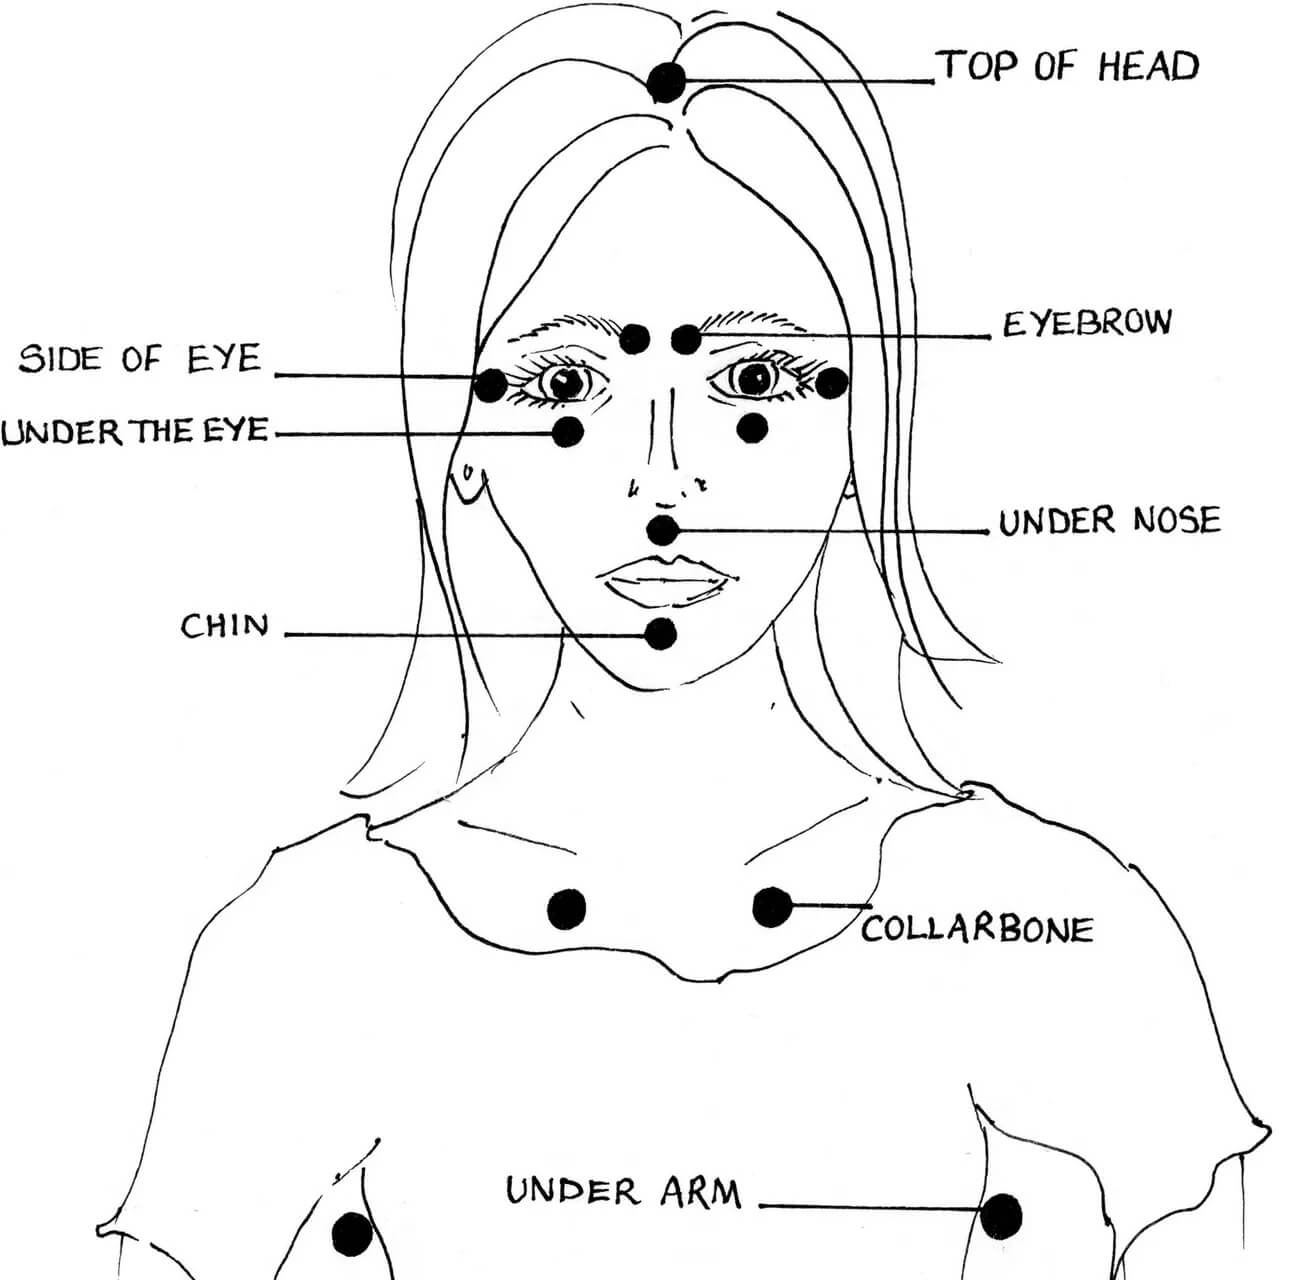 black and white drawing of the top body of a woman showing the Emotional Freedom Technique meridians on her face and upper body